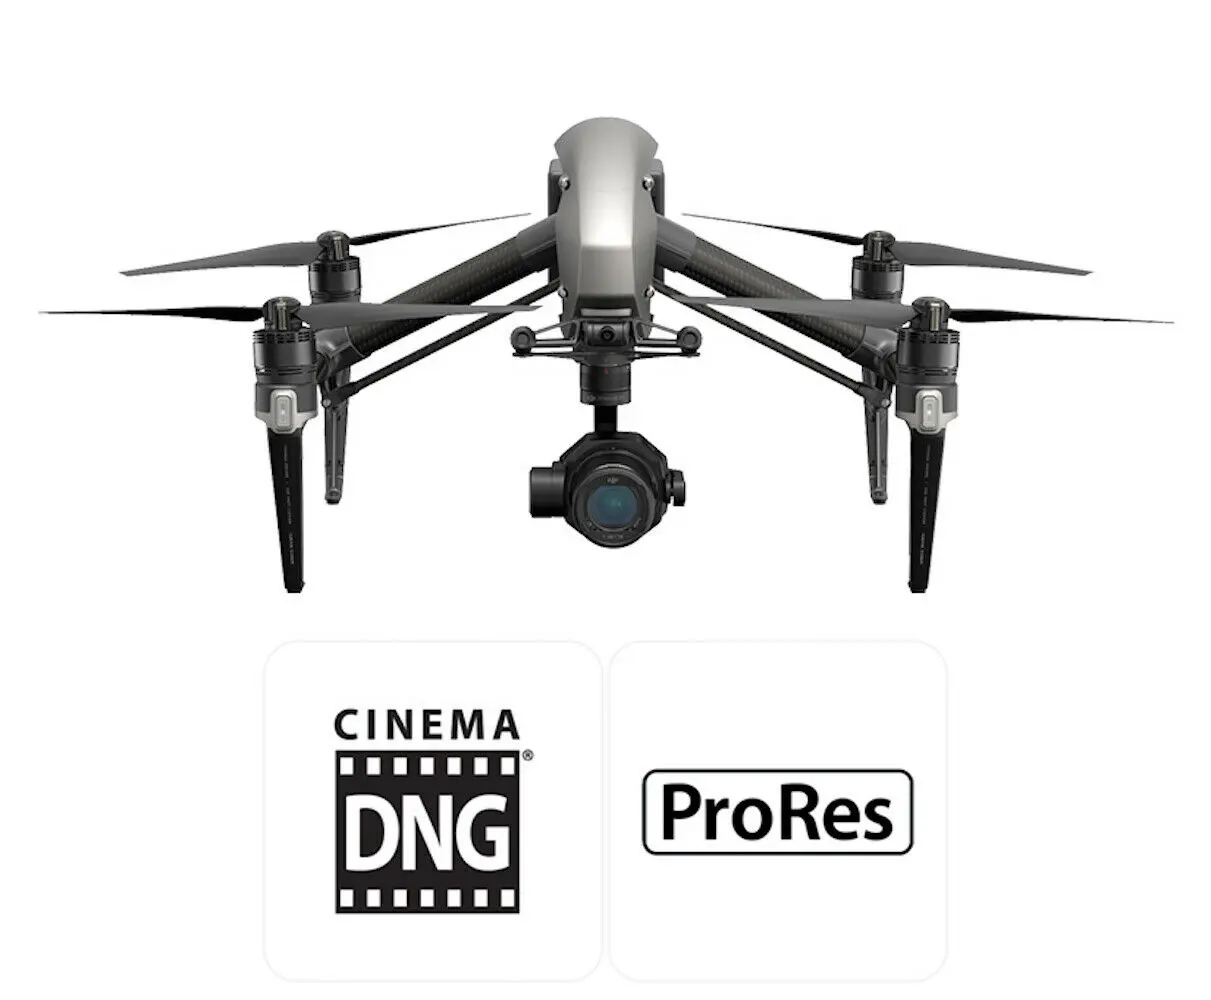 New and Original DJI Inspire 2 X7 Advanced Kit with Zenmuse X5S 4K & 5.2K Video 20.8MP Photo 15mm Lens